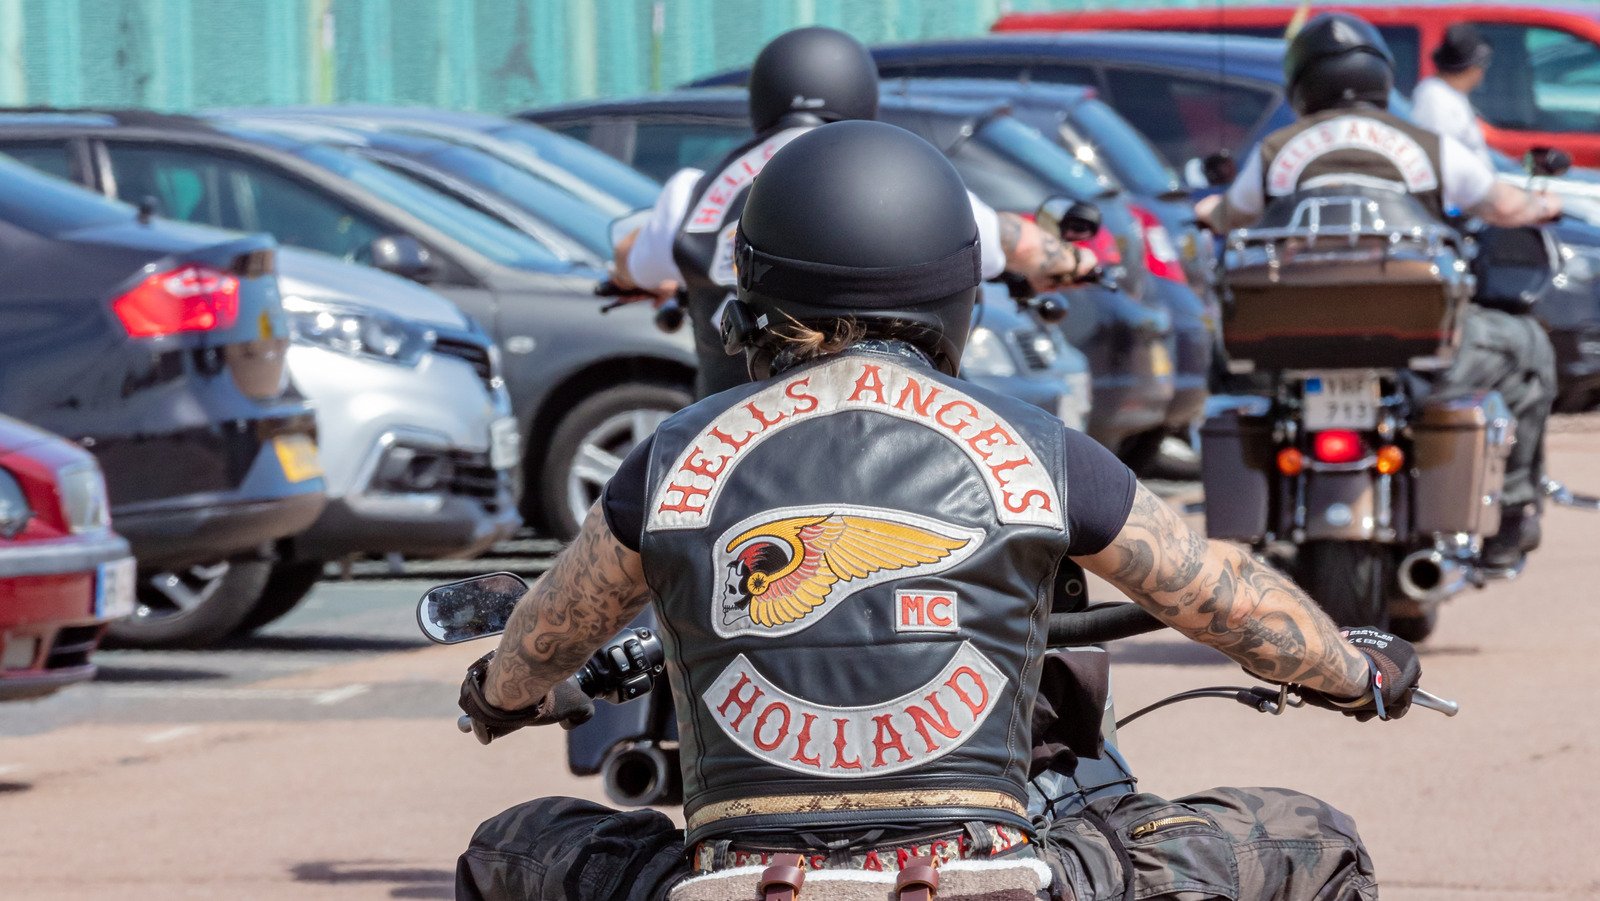 Rules Hells Angels Have To Follow - Grunge